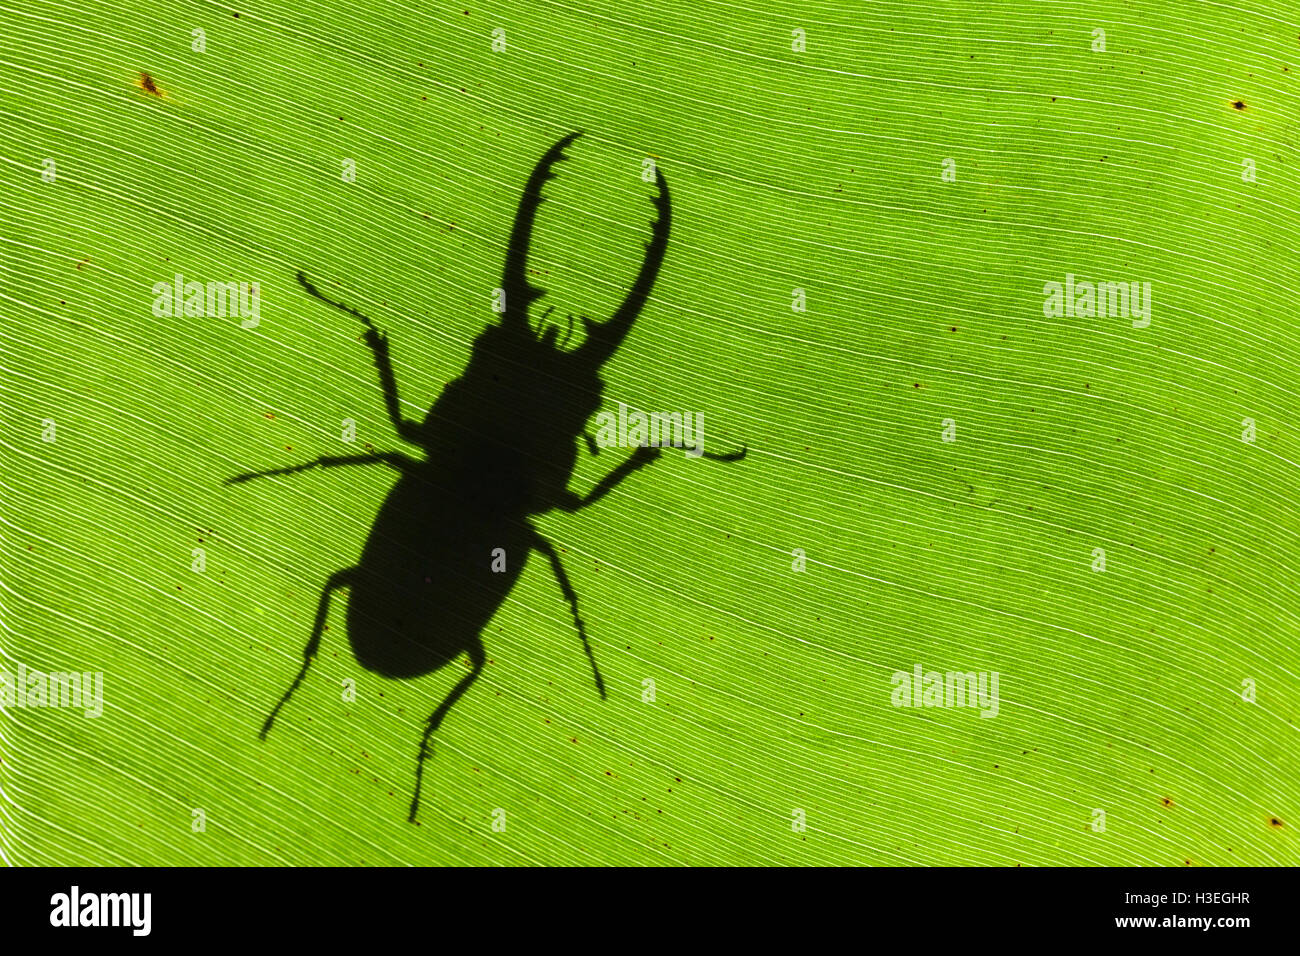 Stag Beetle, Prosopocoilus astaocides blanchardi is in the Family Lucanidae.  Male in silhouette on a banana leaf. Stock Photo